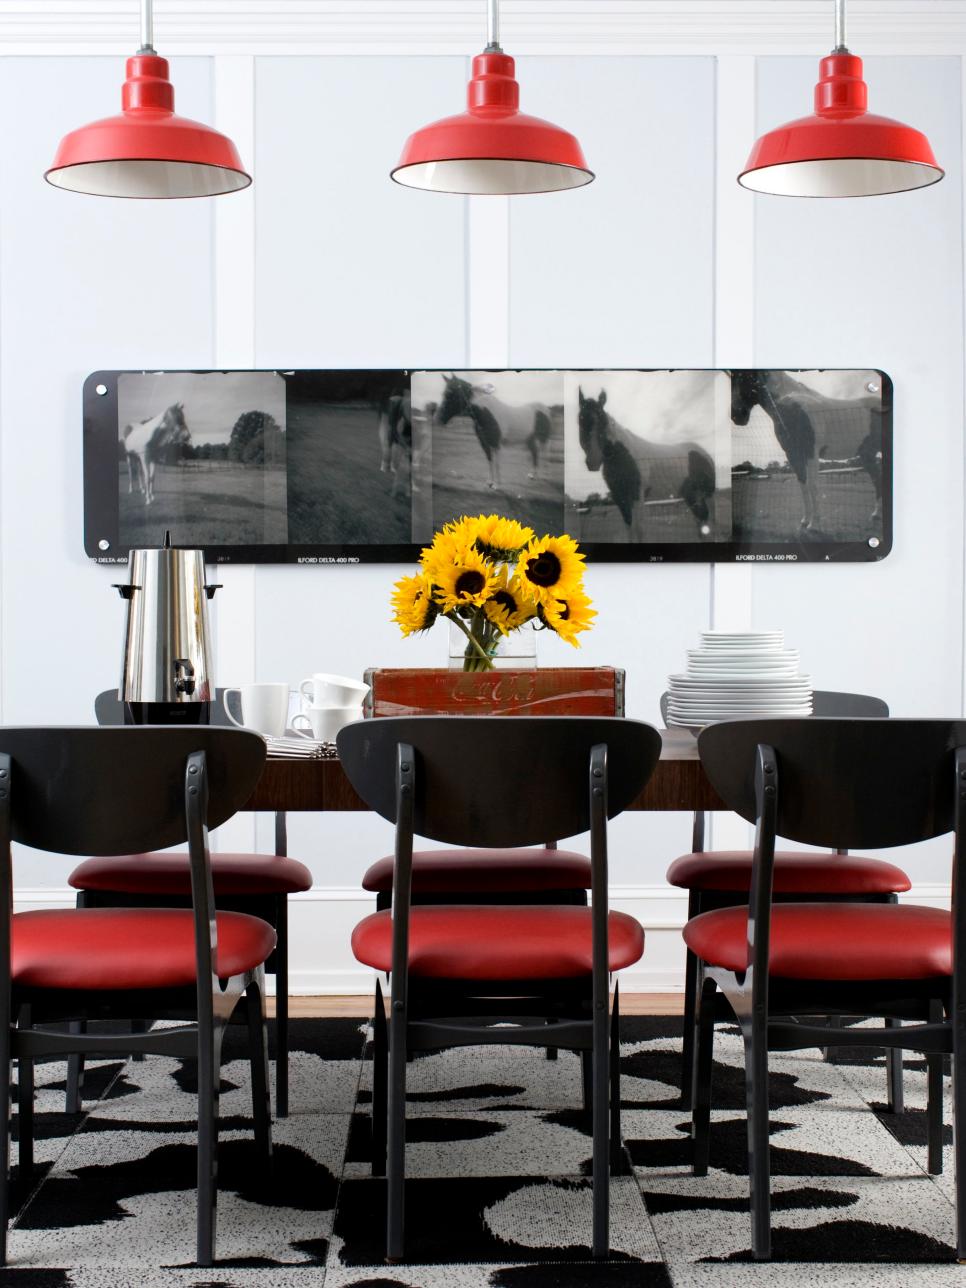 Dining Room With Red Industrial Lighting